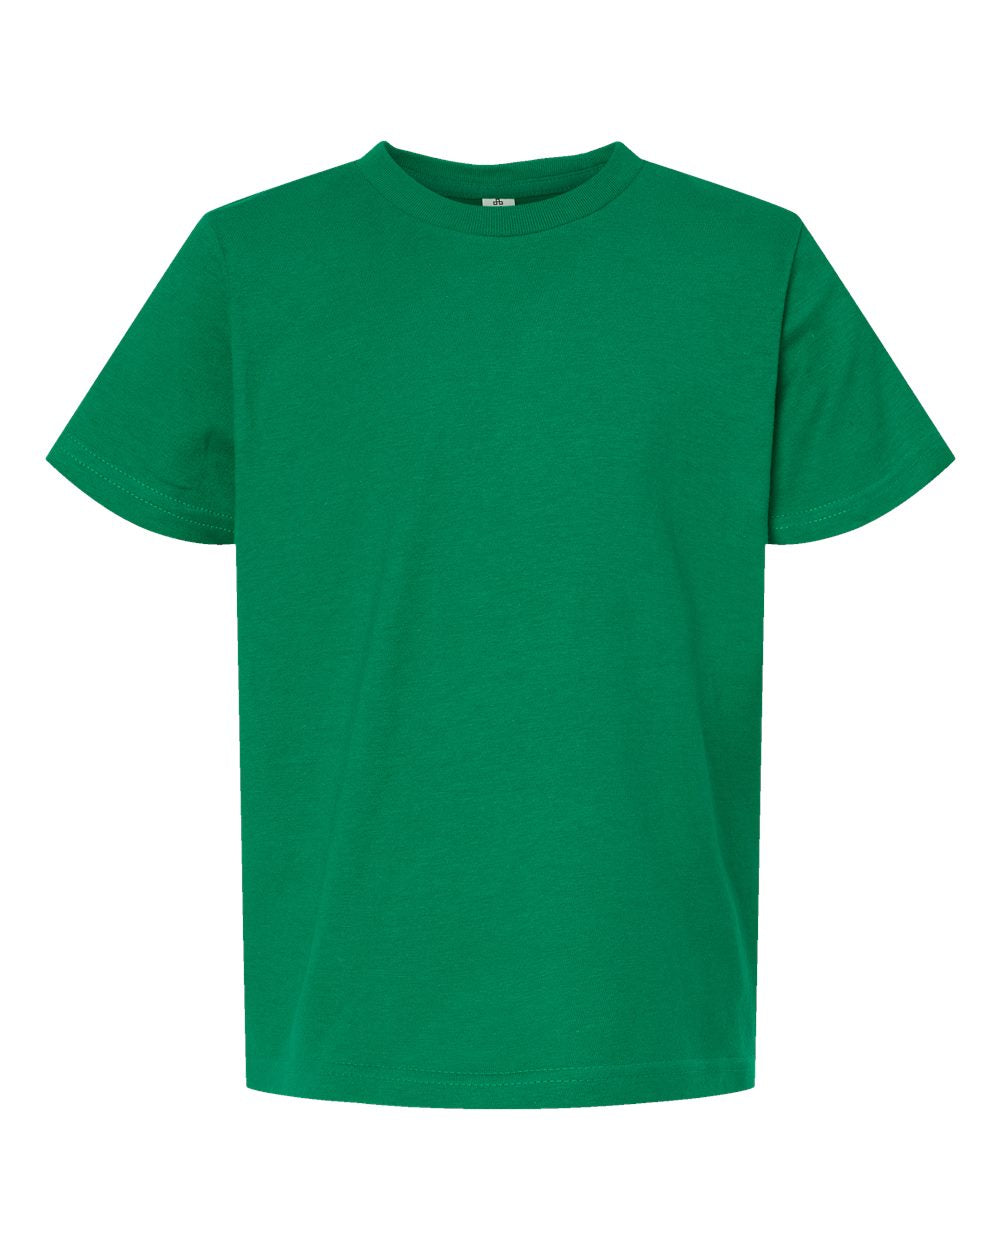 Tultex Youth Tee (235) in Kelly Green